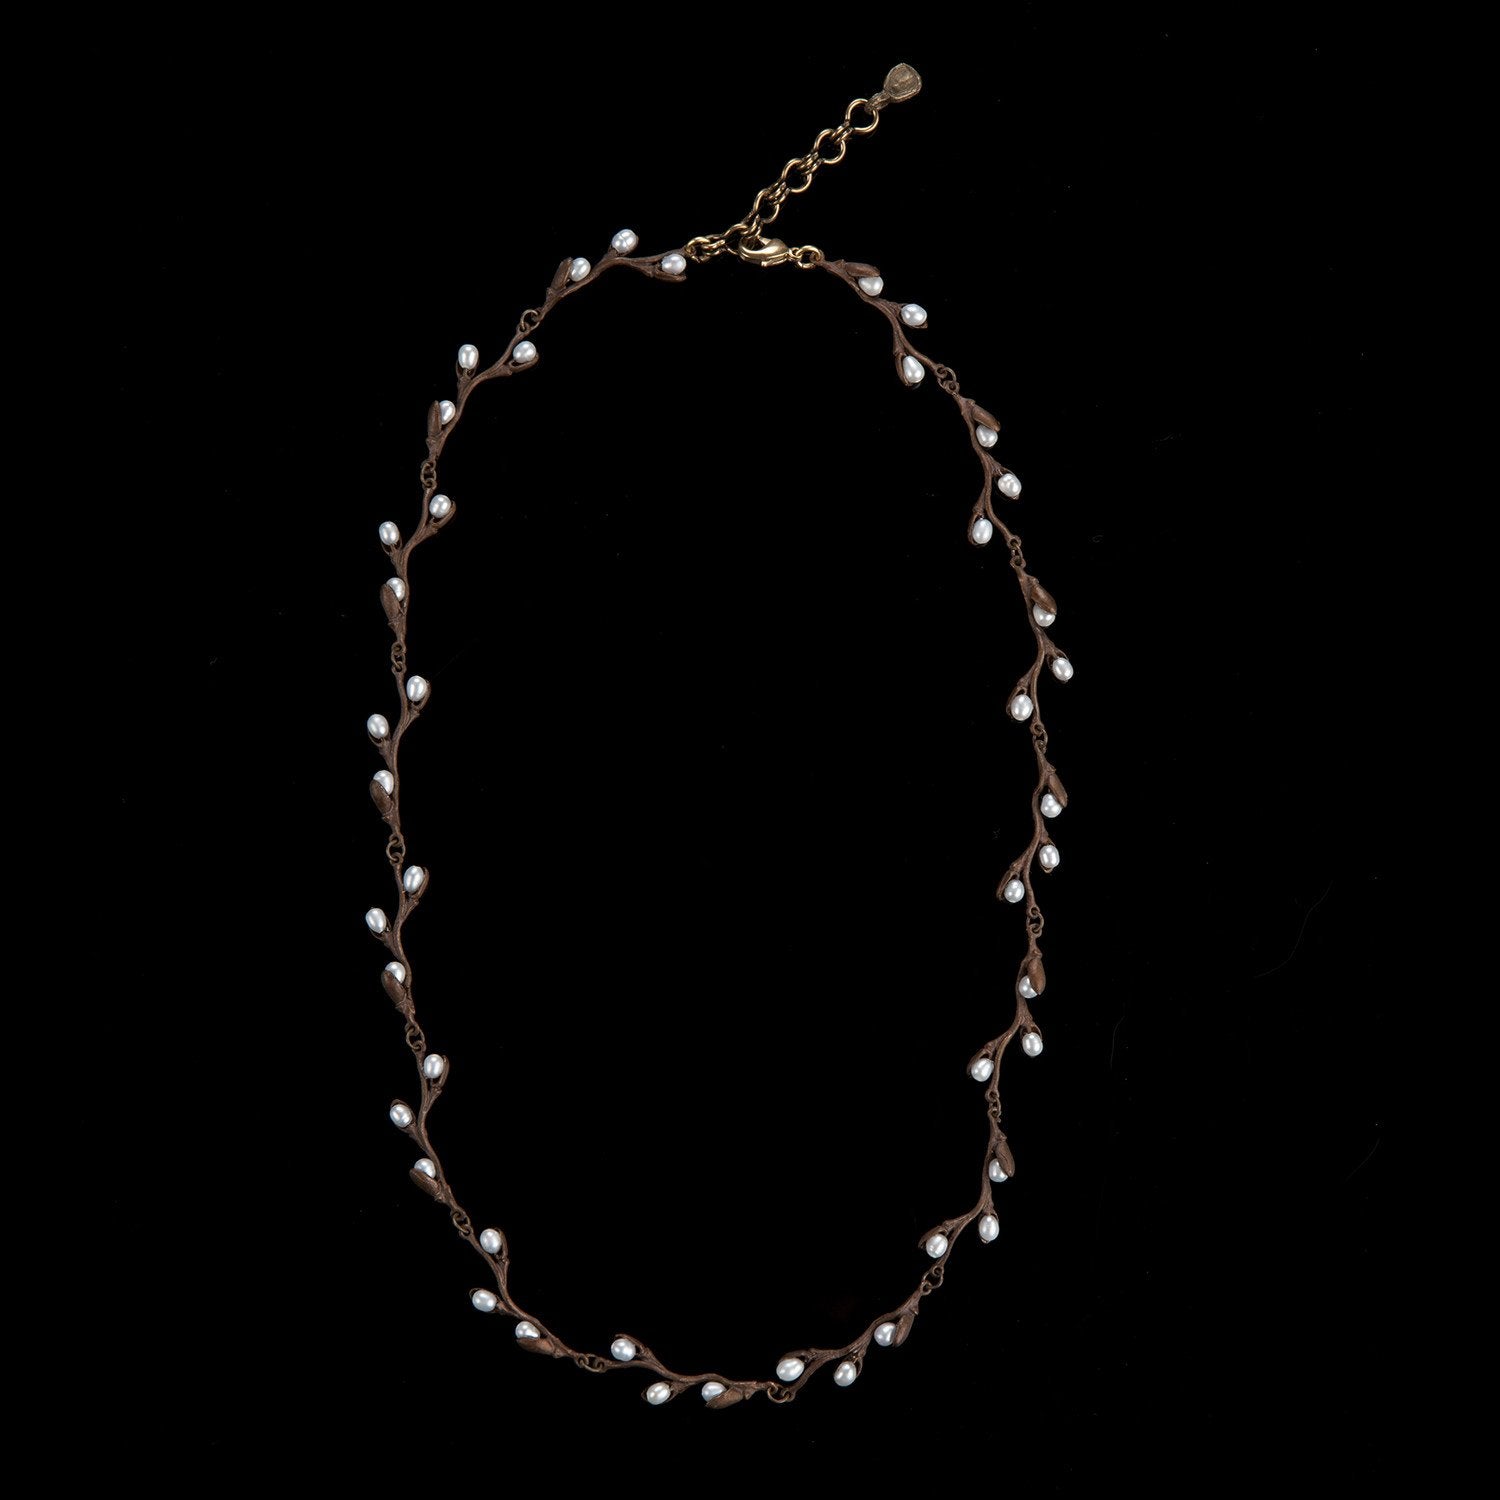 Pussy Willow Necklace - Contour